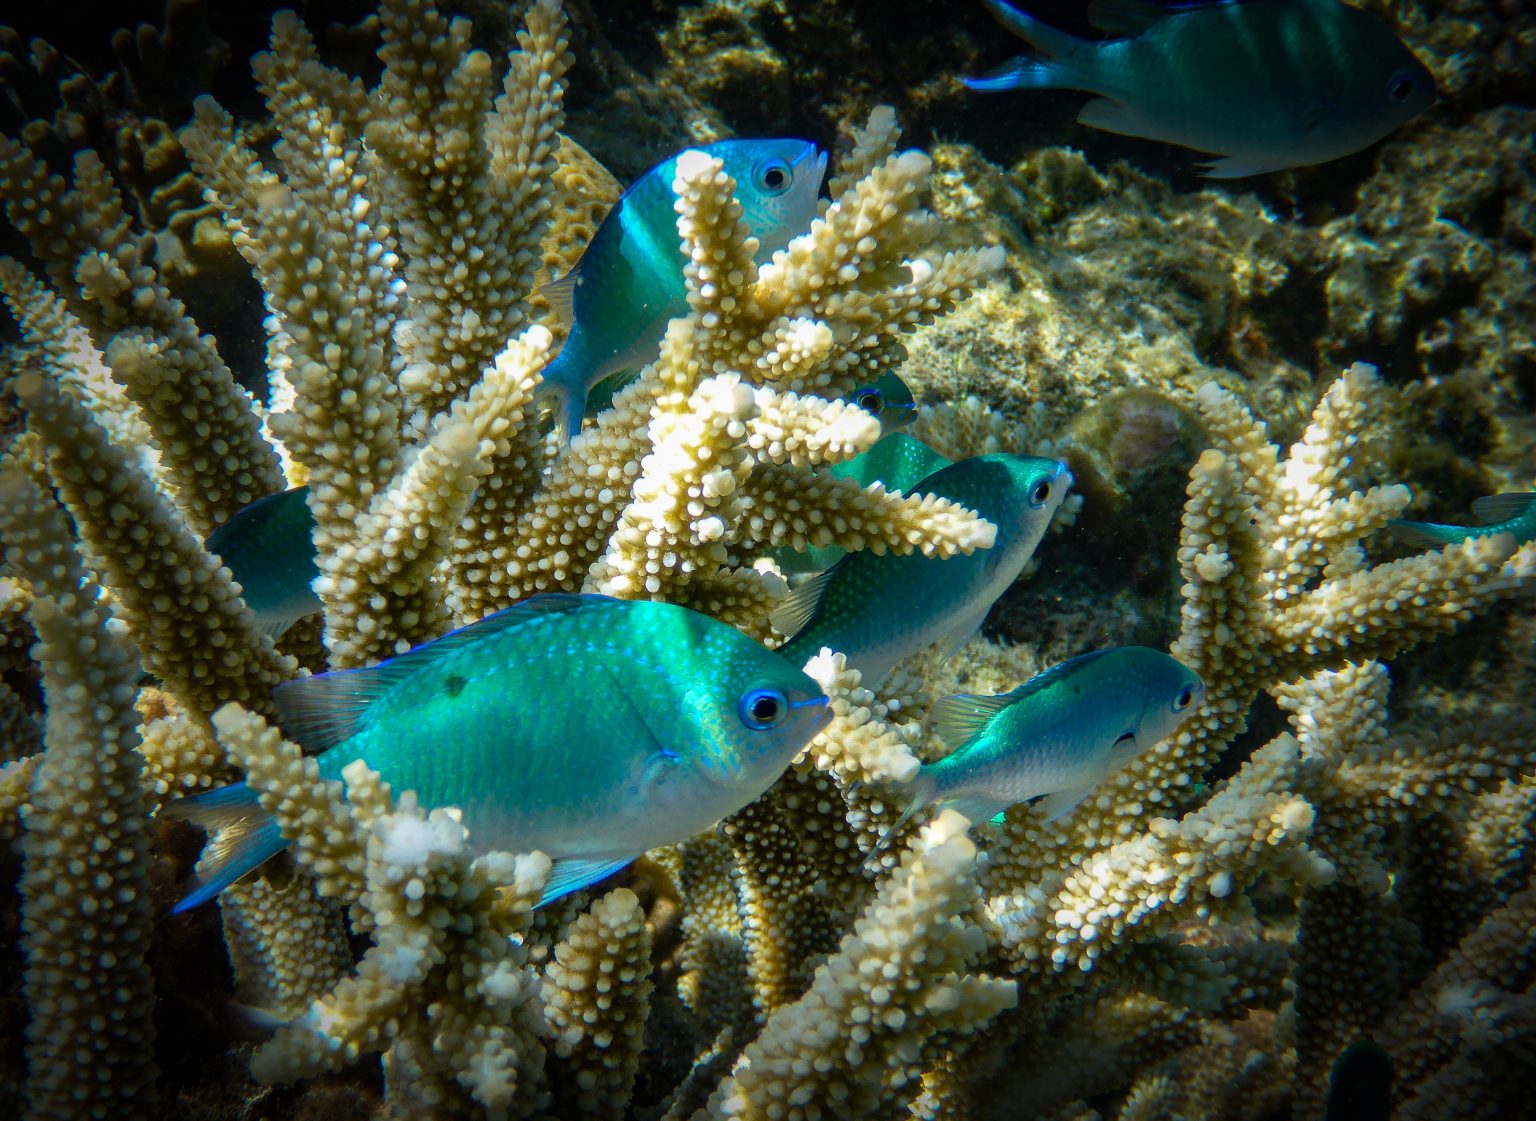 Staghorn Damsel fish at Moore Reef in Cairns, Australia. Photo contributed by Nahuai Badiola to the WordPress Photo Directory.